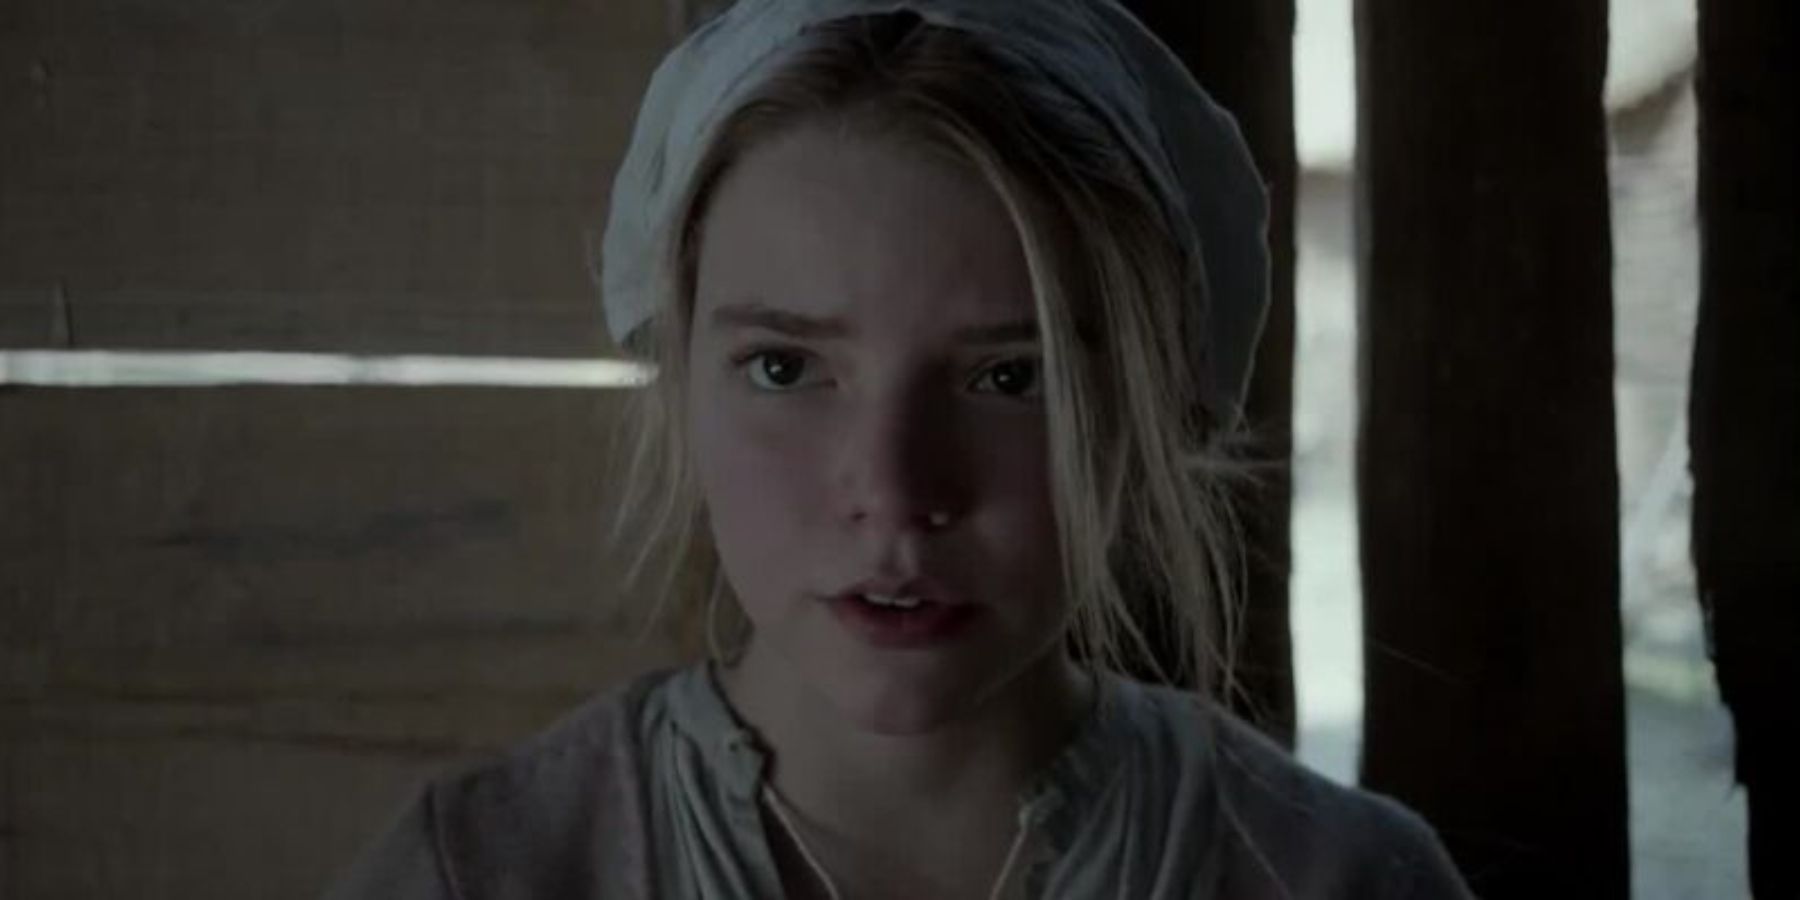 Anya Taylor-Joy as Thomasin in The Witch